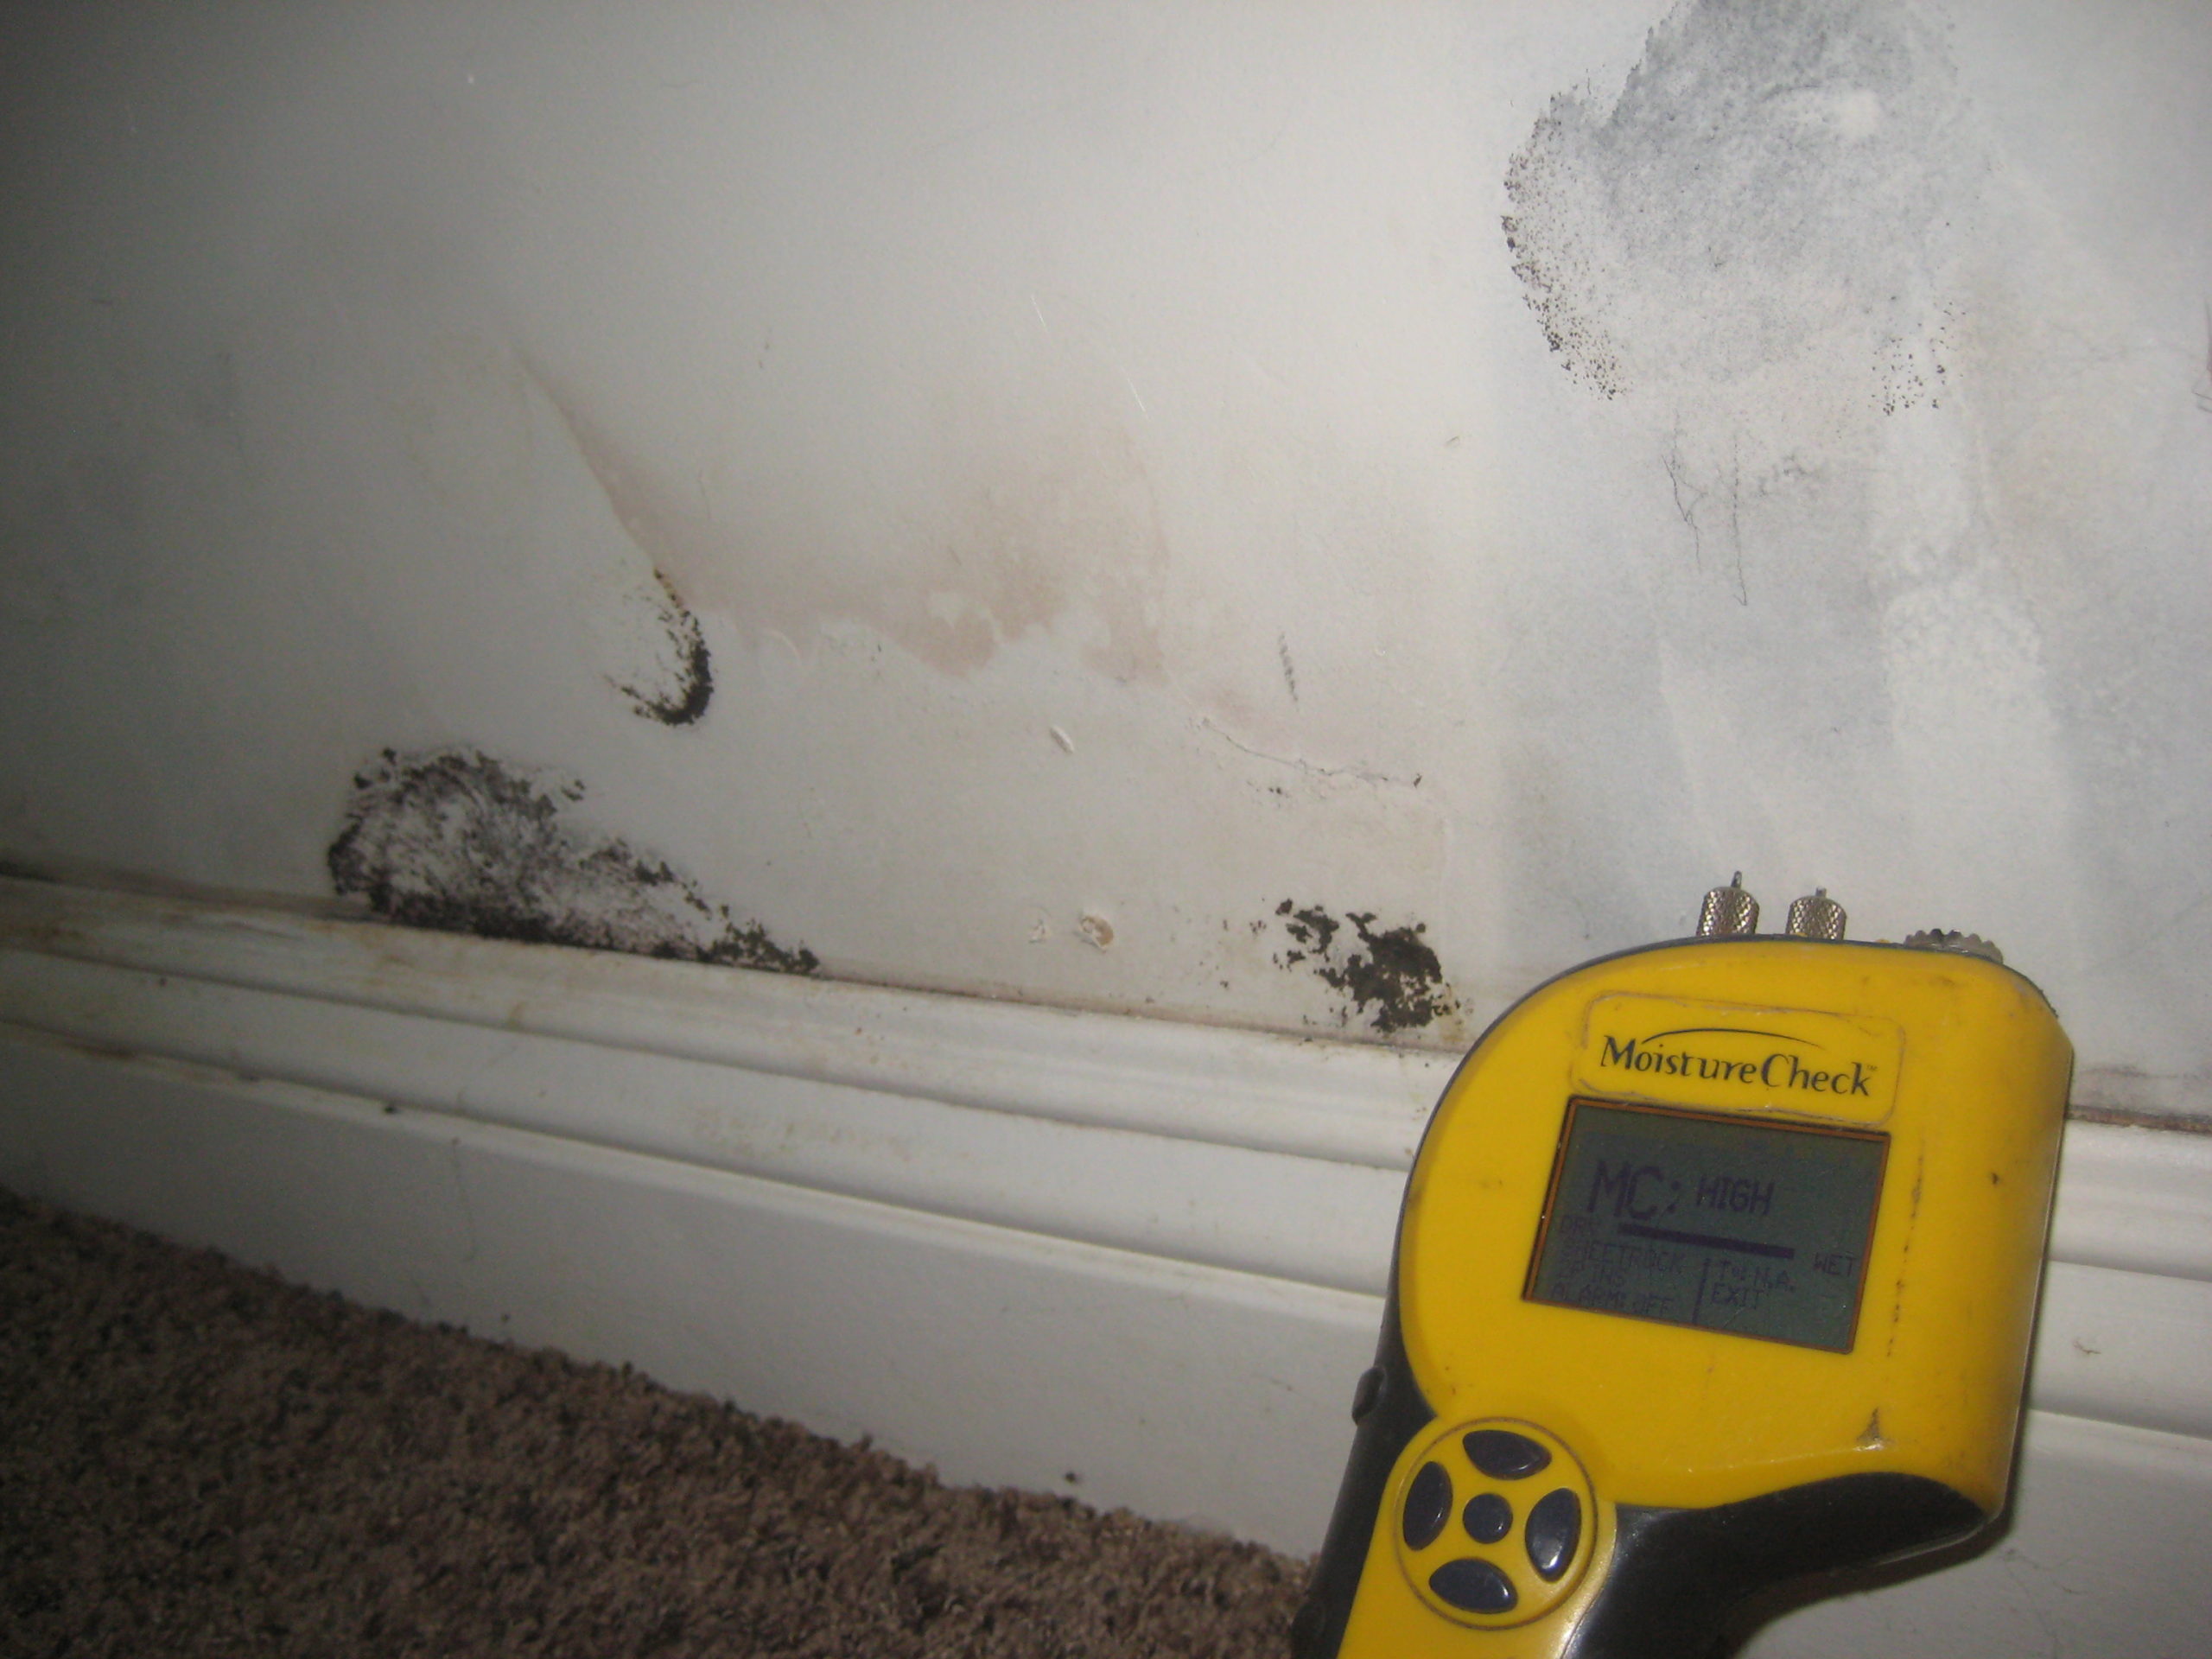 water damage and black mold growth on a wall in a LA home